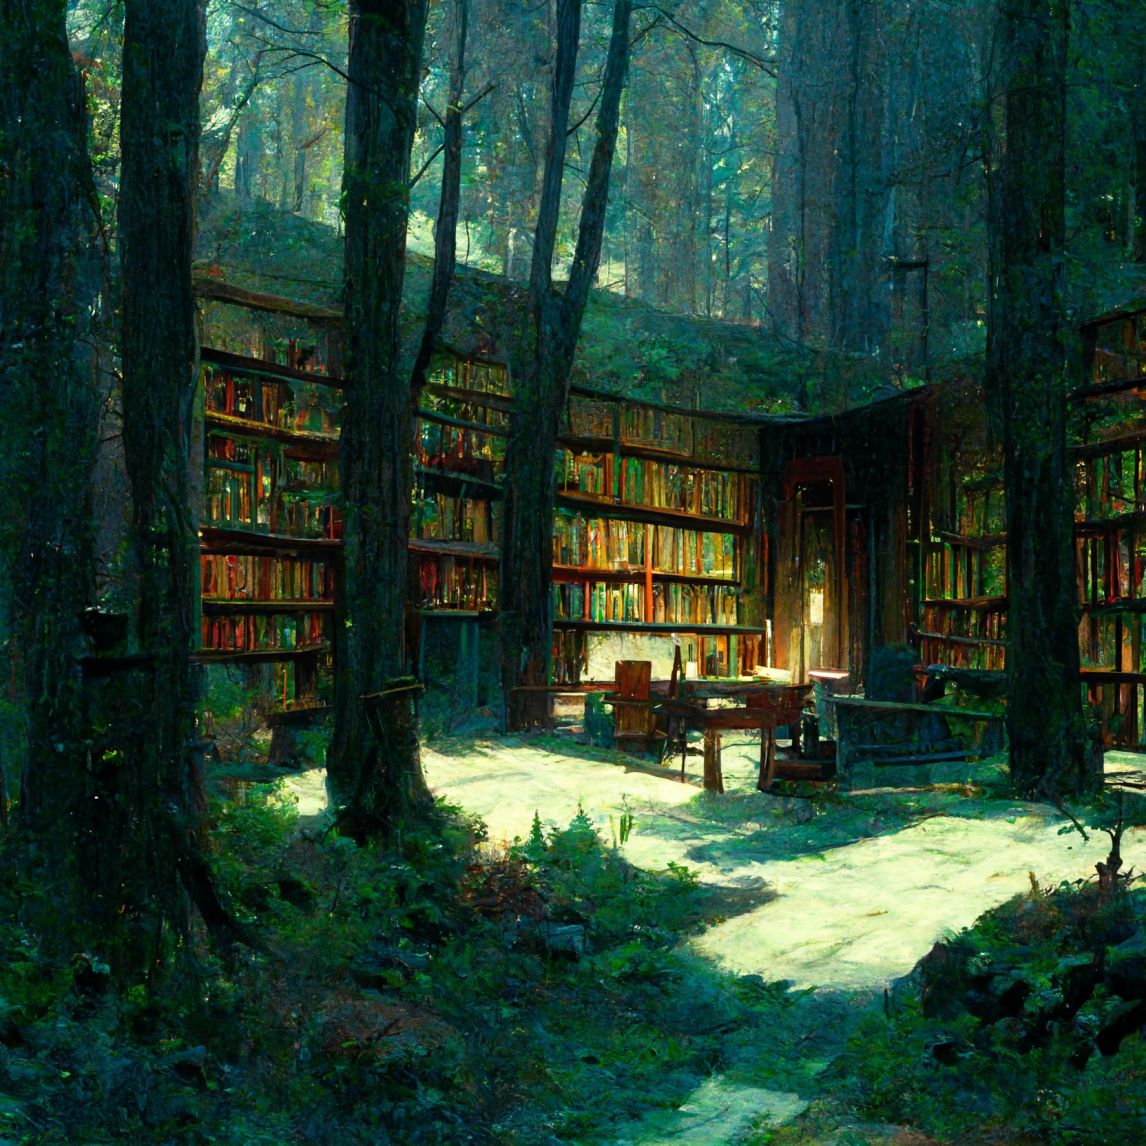 Library_in_a_quiet_forest_73782948-c642-45c3-a379-78f29d8ffdc8.png